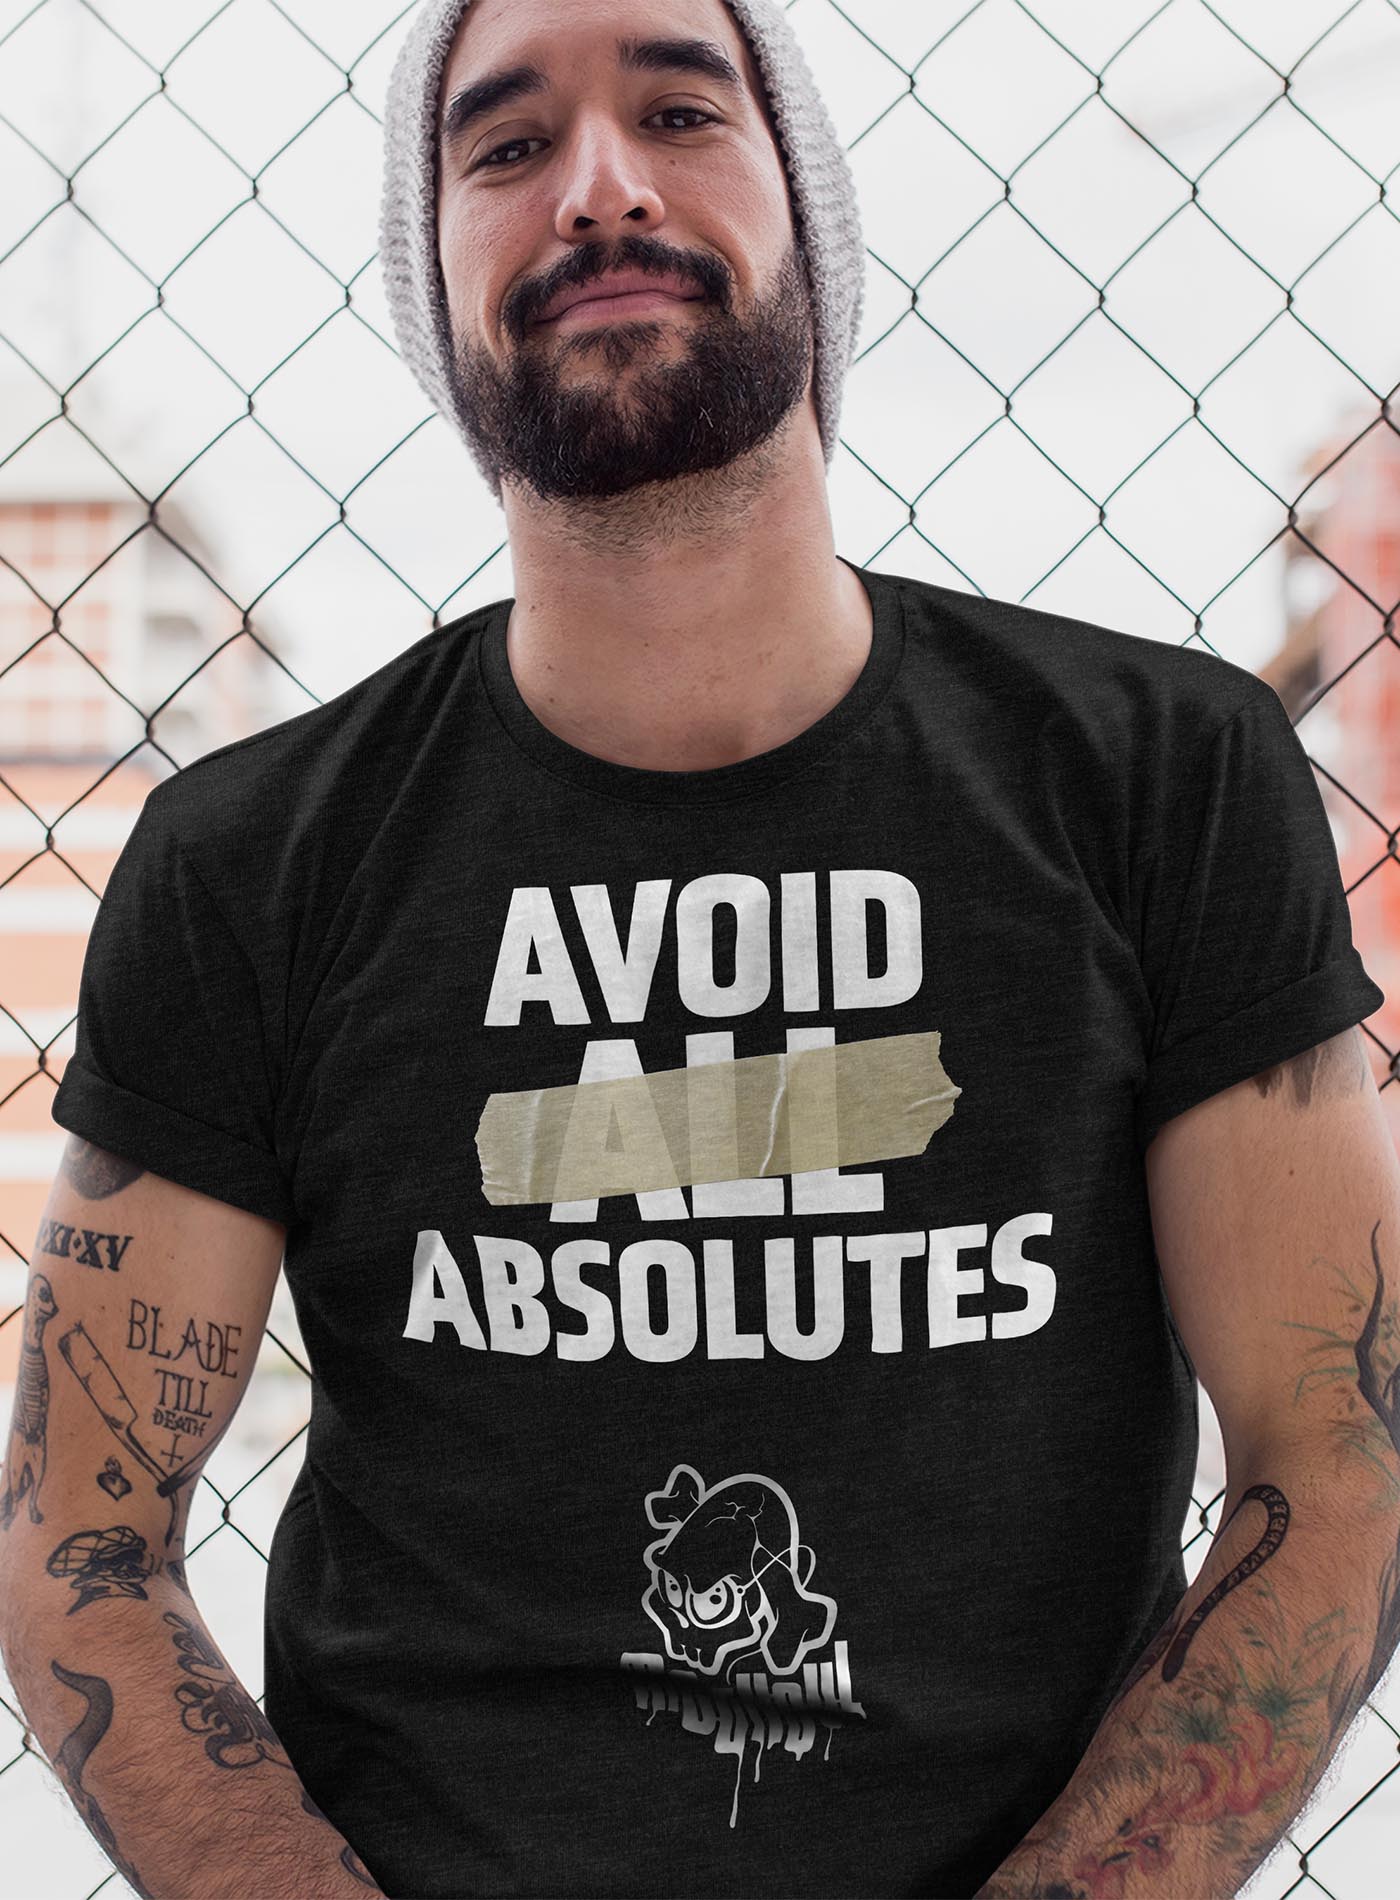 man modeling a heather black unisex t-shirt featuring the paradoxical phrase "avoid all absolutes" and the moghoul logo.